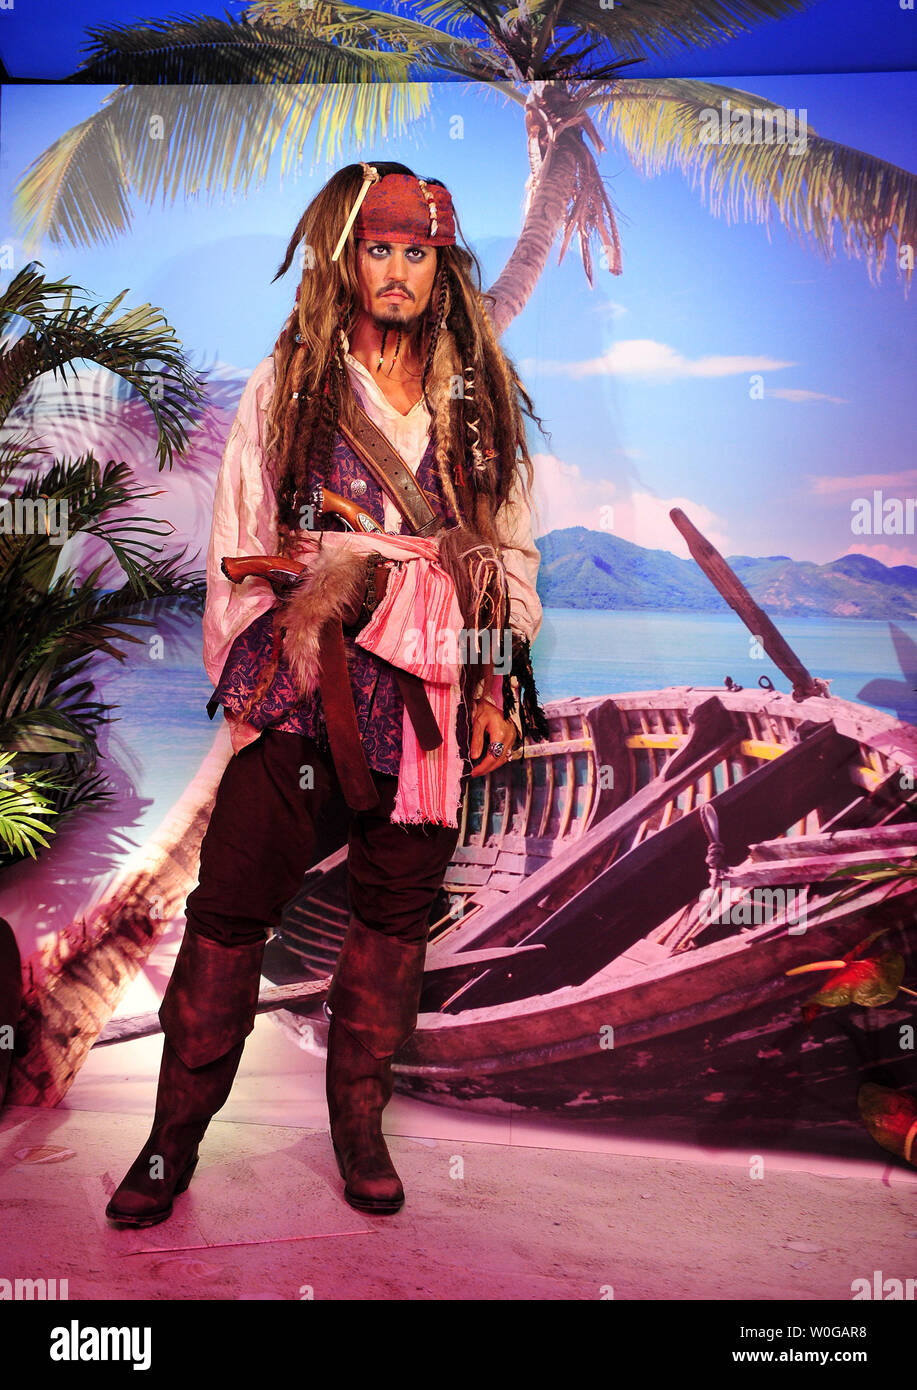 Madame Tussauds Wax Museum unveils a wax figure of Johnny Depp as Captain Jack Sparrow in celebration of the release of 'Pirates of the Caribbean: On Stranger Tides' in Washington on May 12, 2011.  UPI/Kevin Dietsch Stock Photo